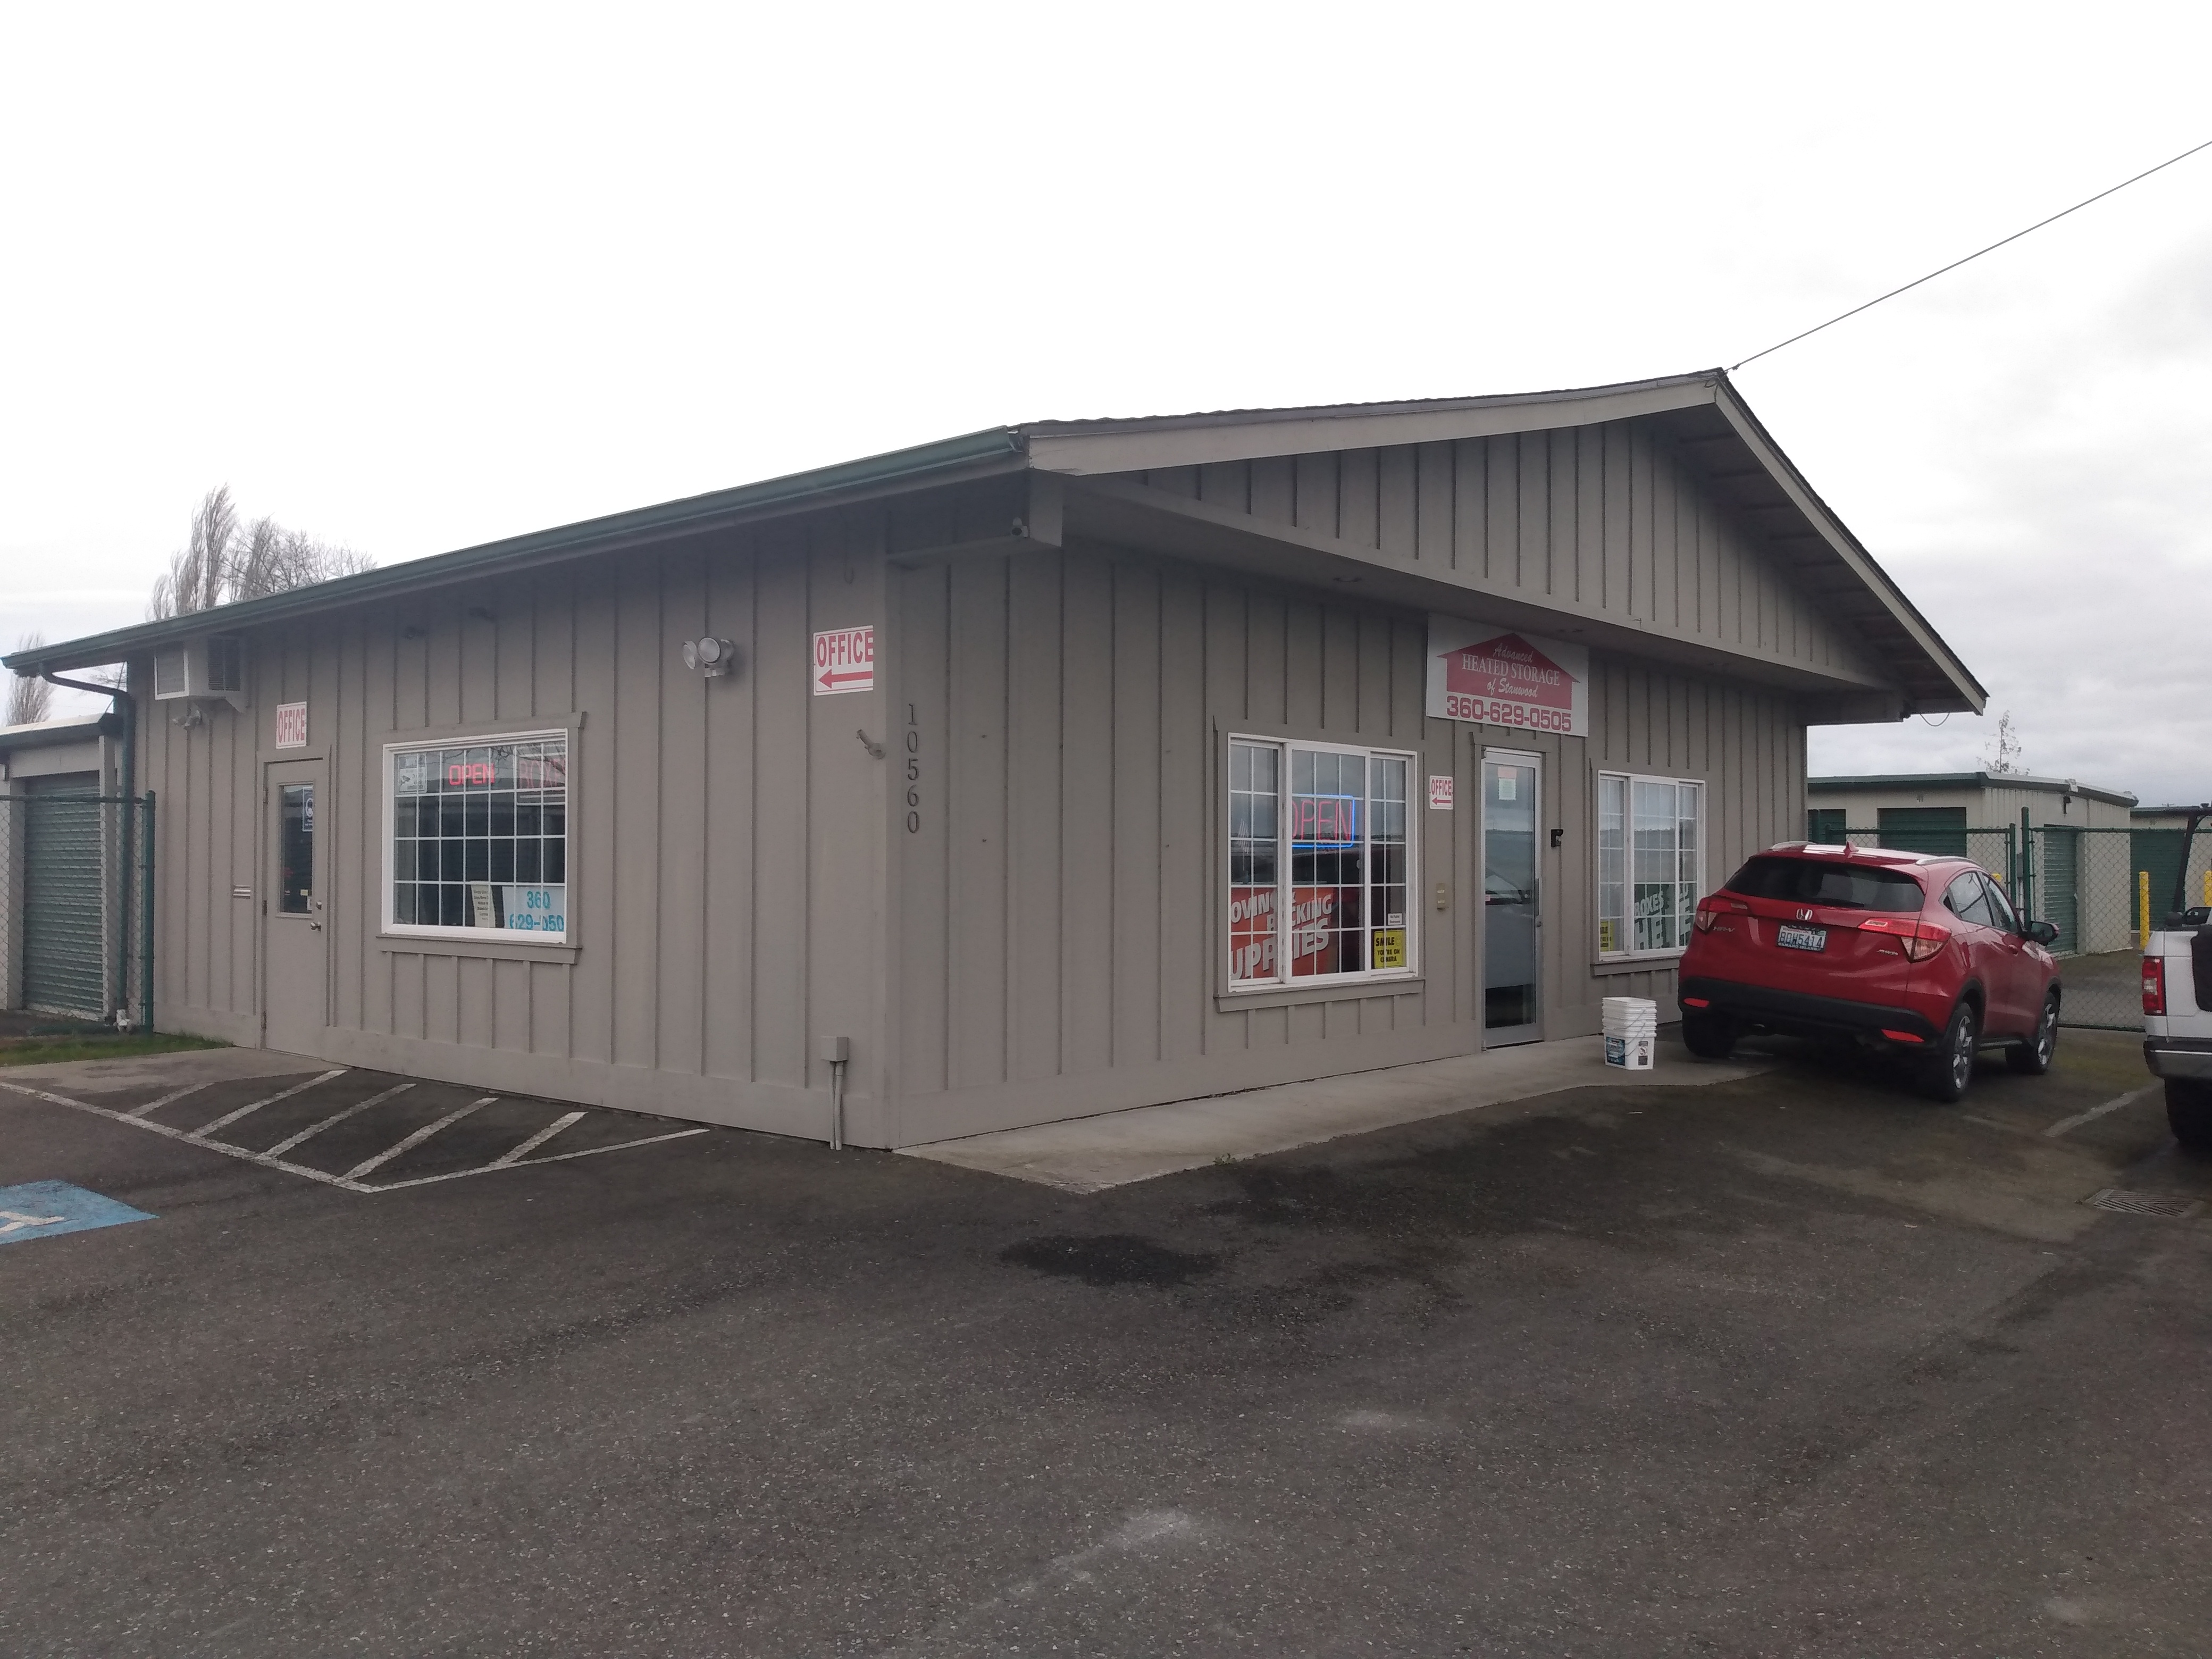 manned facility in stanwood wa, friendly office staff